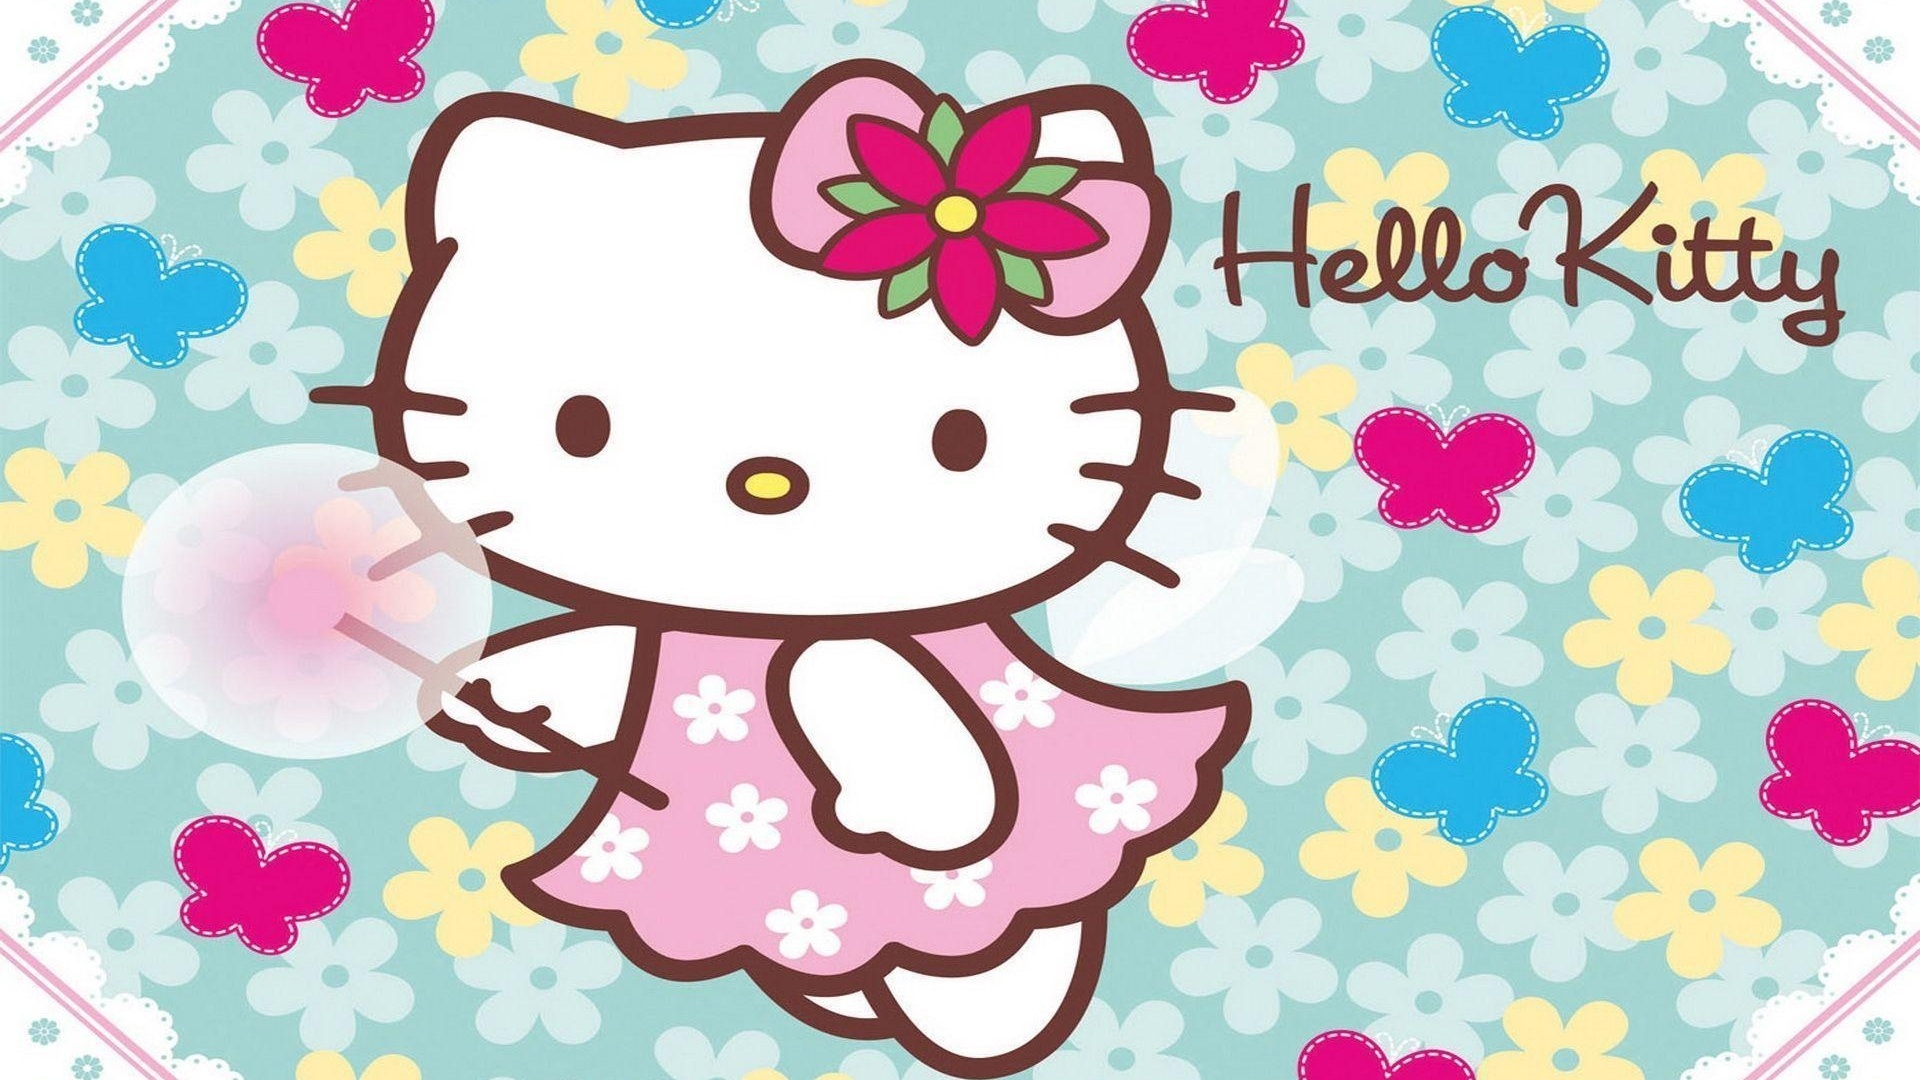 Hello Kitty Spring, Christopher Simpson, Colorful wallpaper, Playful, 1920x1080 Full HD Desktop